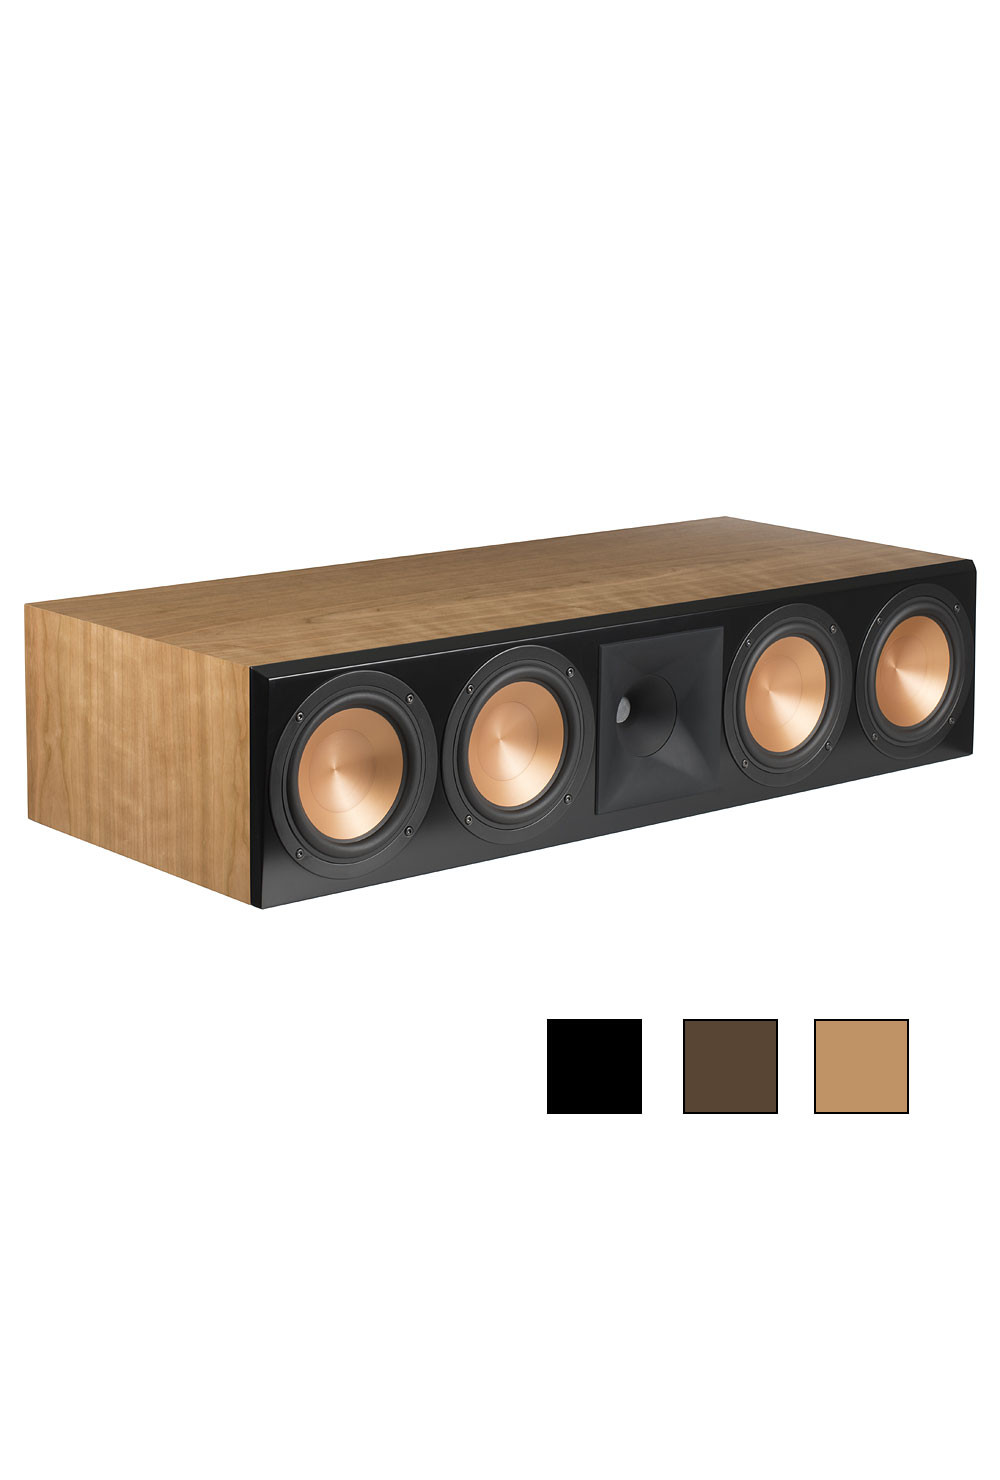 Klipsch Reference RC-64 III Cherry